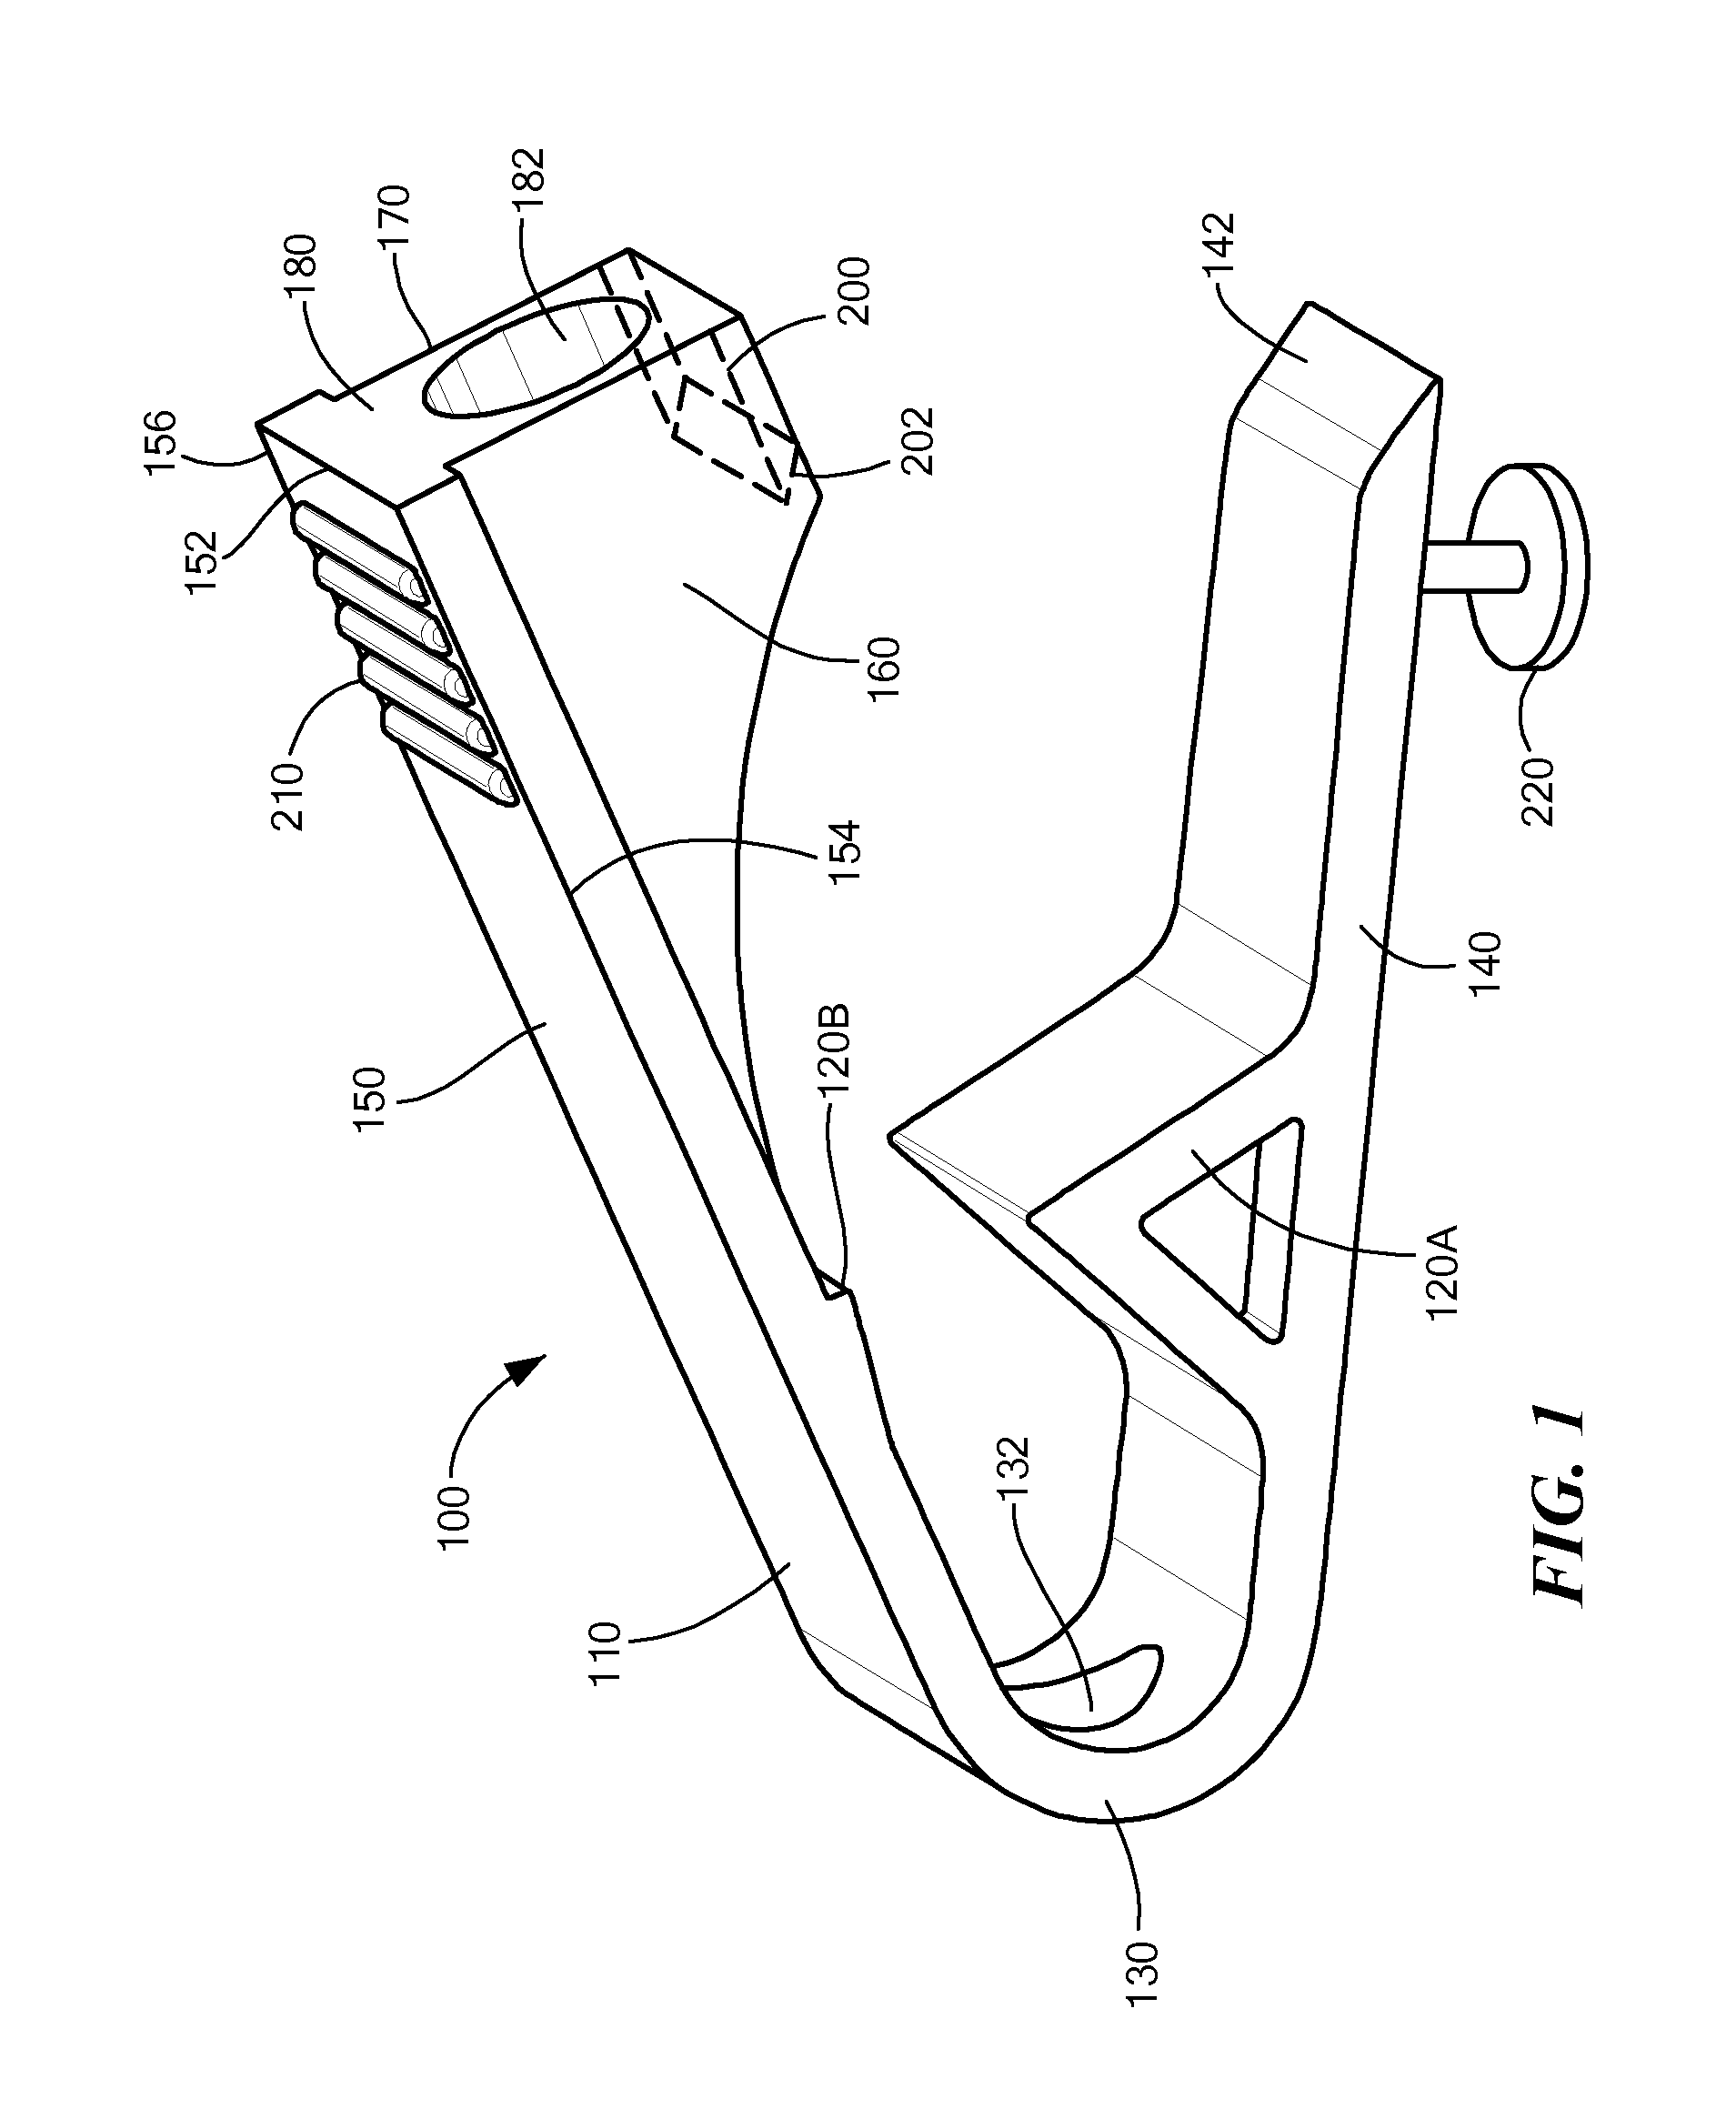 Non-Reopening Tubing Clamp and Method of Use Thereof